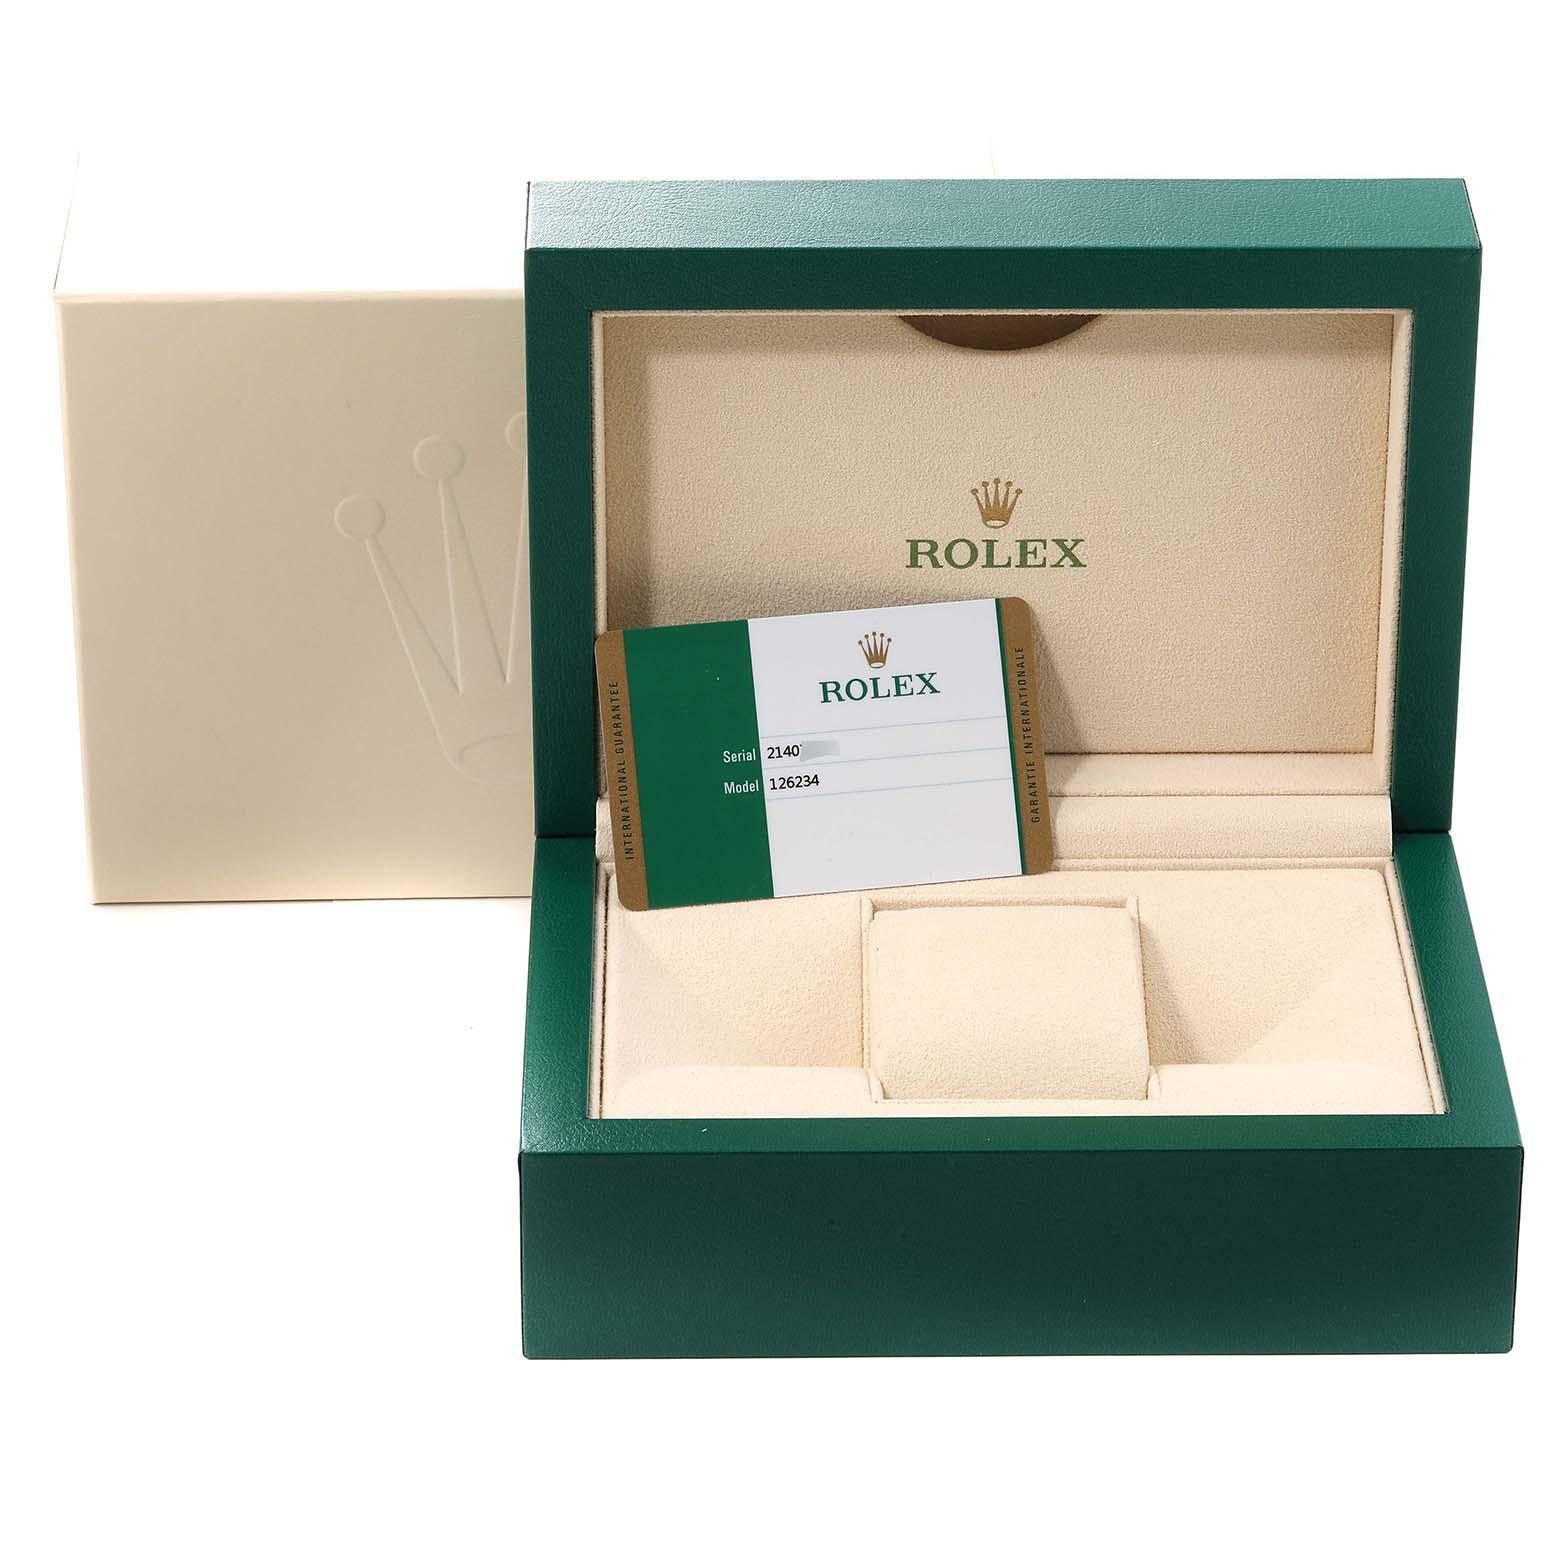 Rolex Datejust Steel White Gold Blue Dial Mens Watch 126234 Box Card For Sale 5